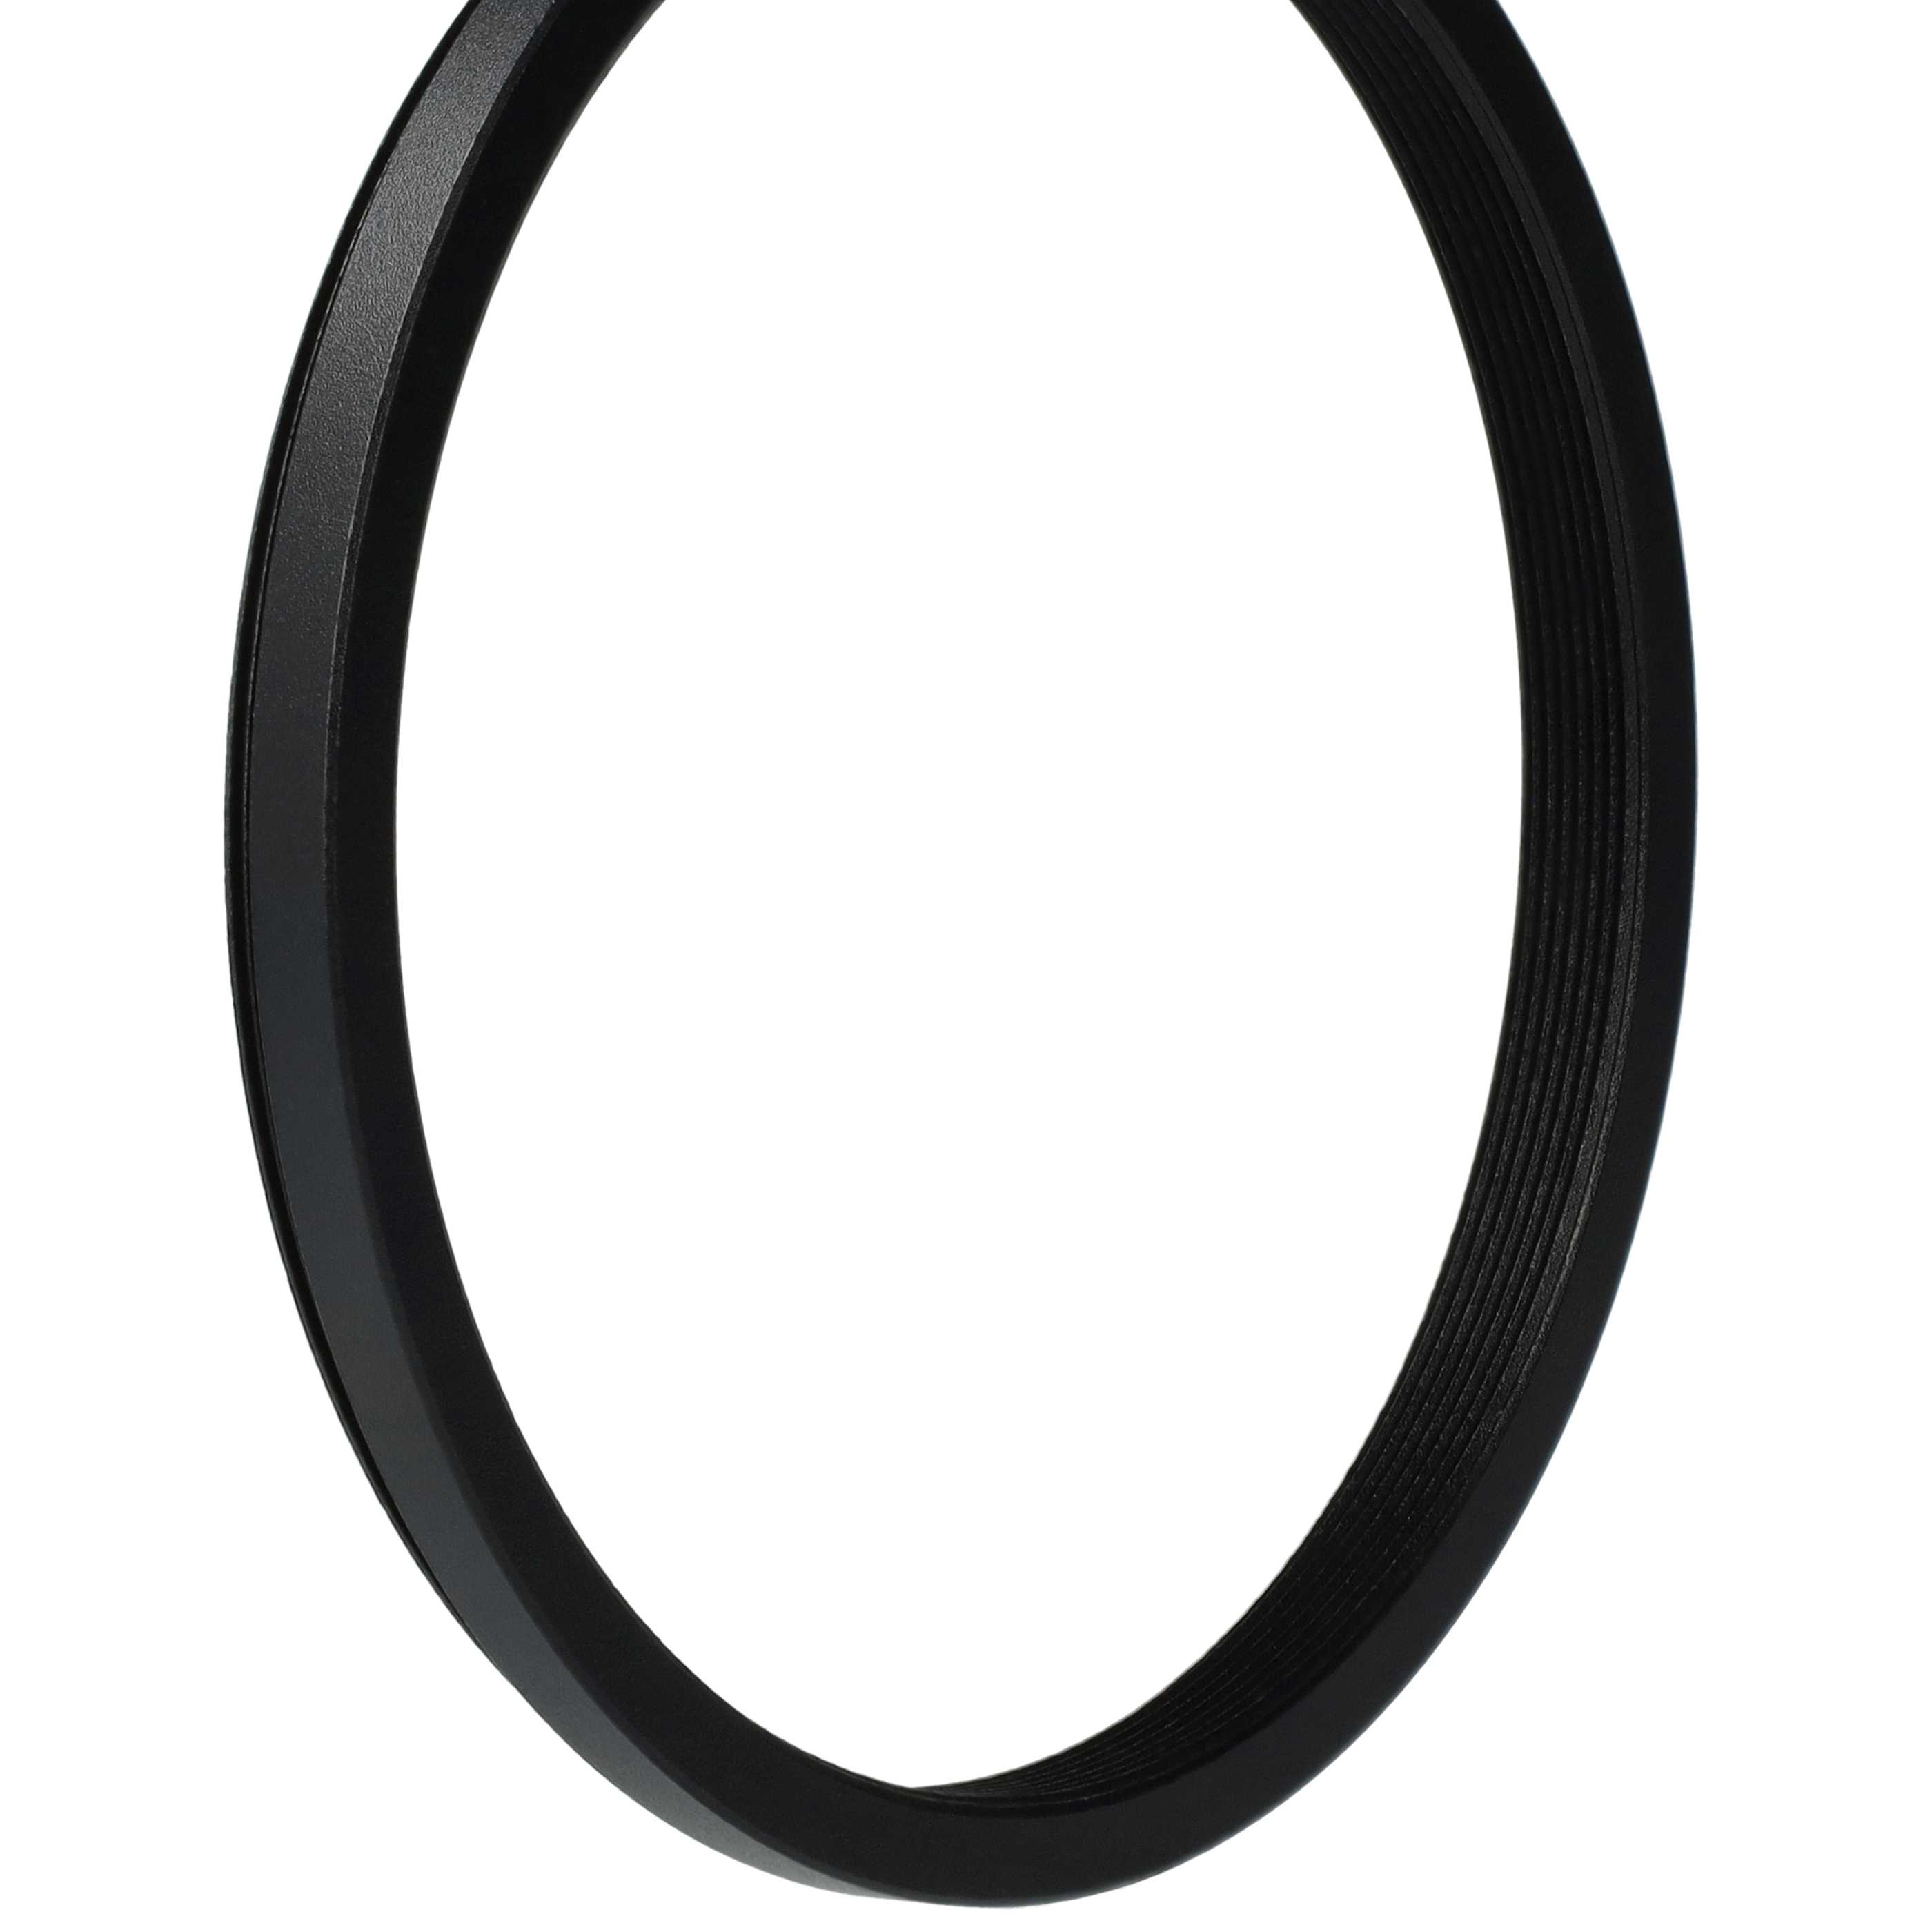 Step-Down Ring Adapter from 77 mm to 72 mm suitable for Camera Lens - Filter Adapter, metal